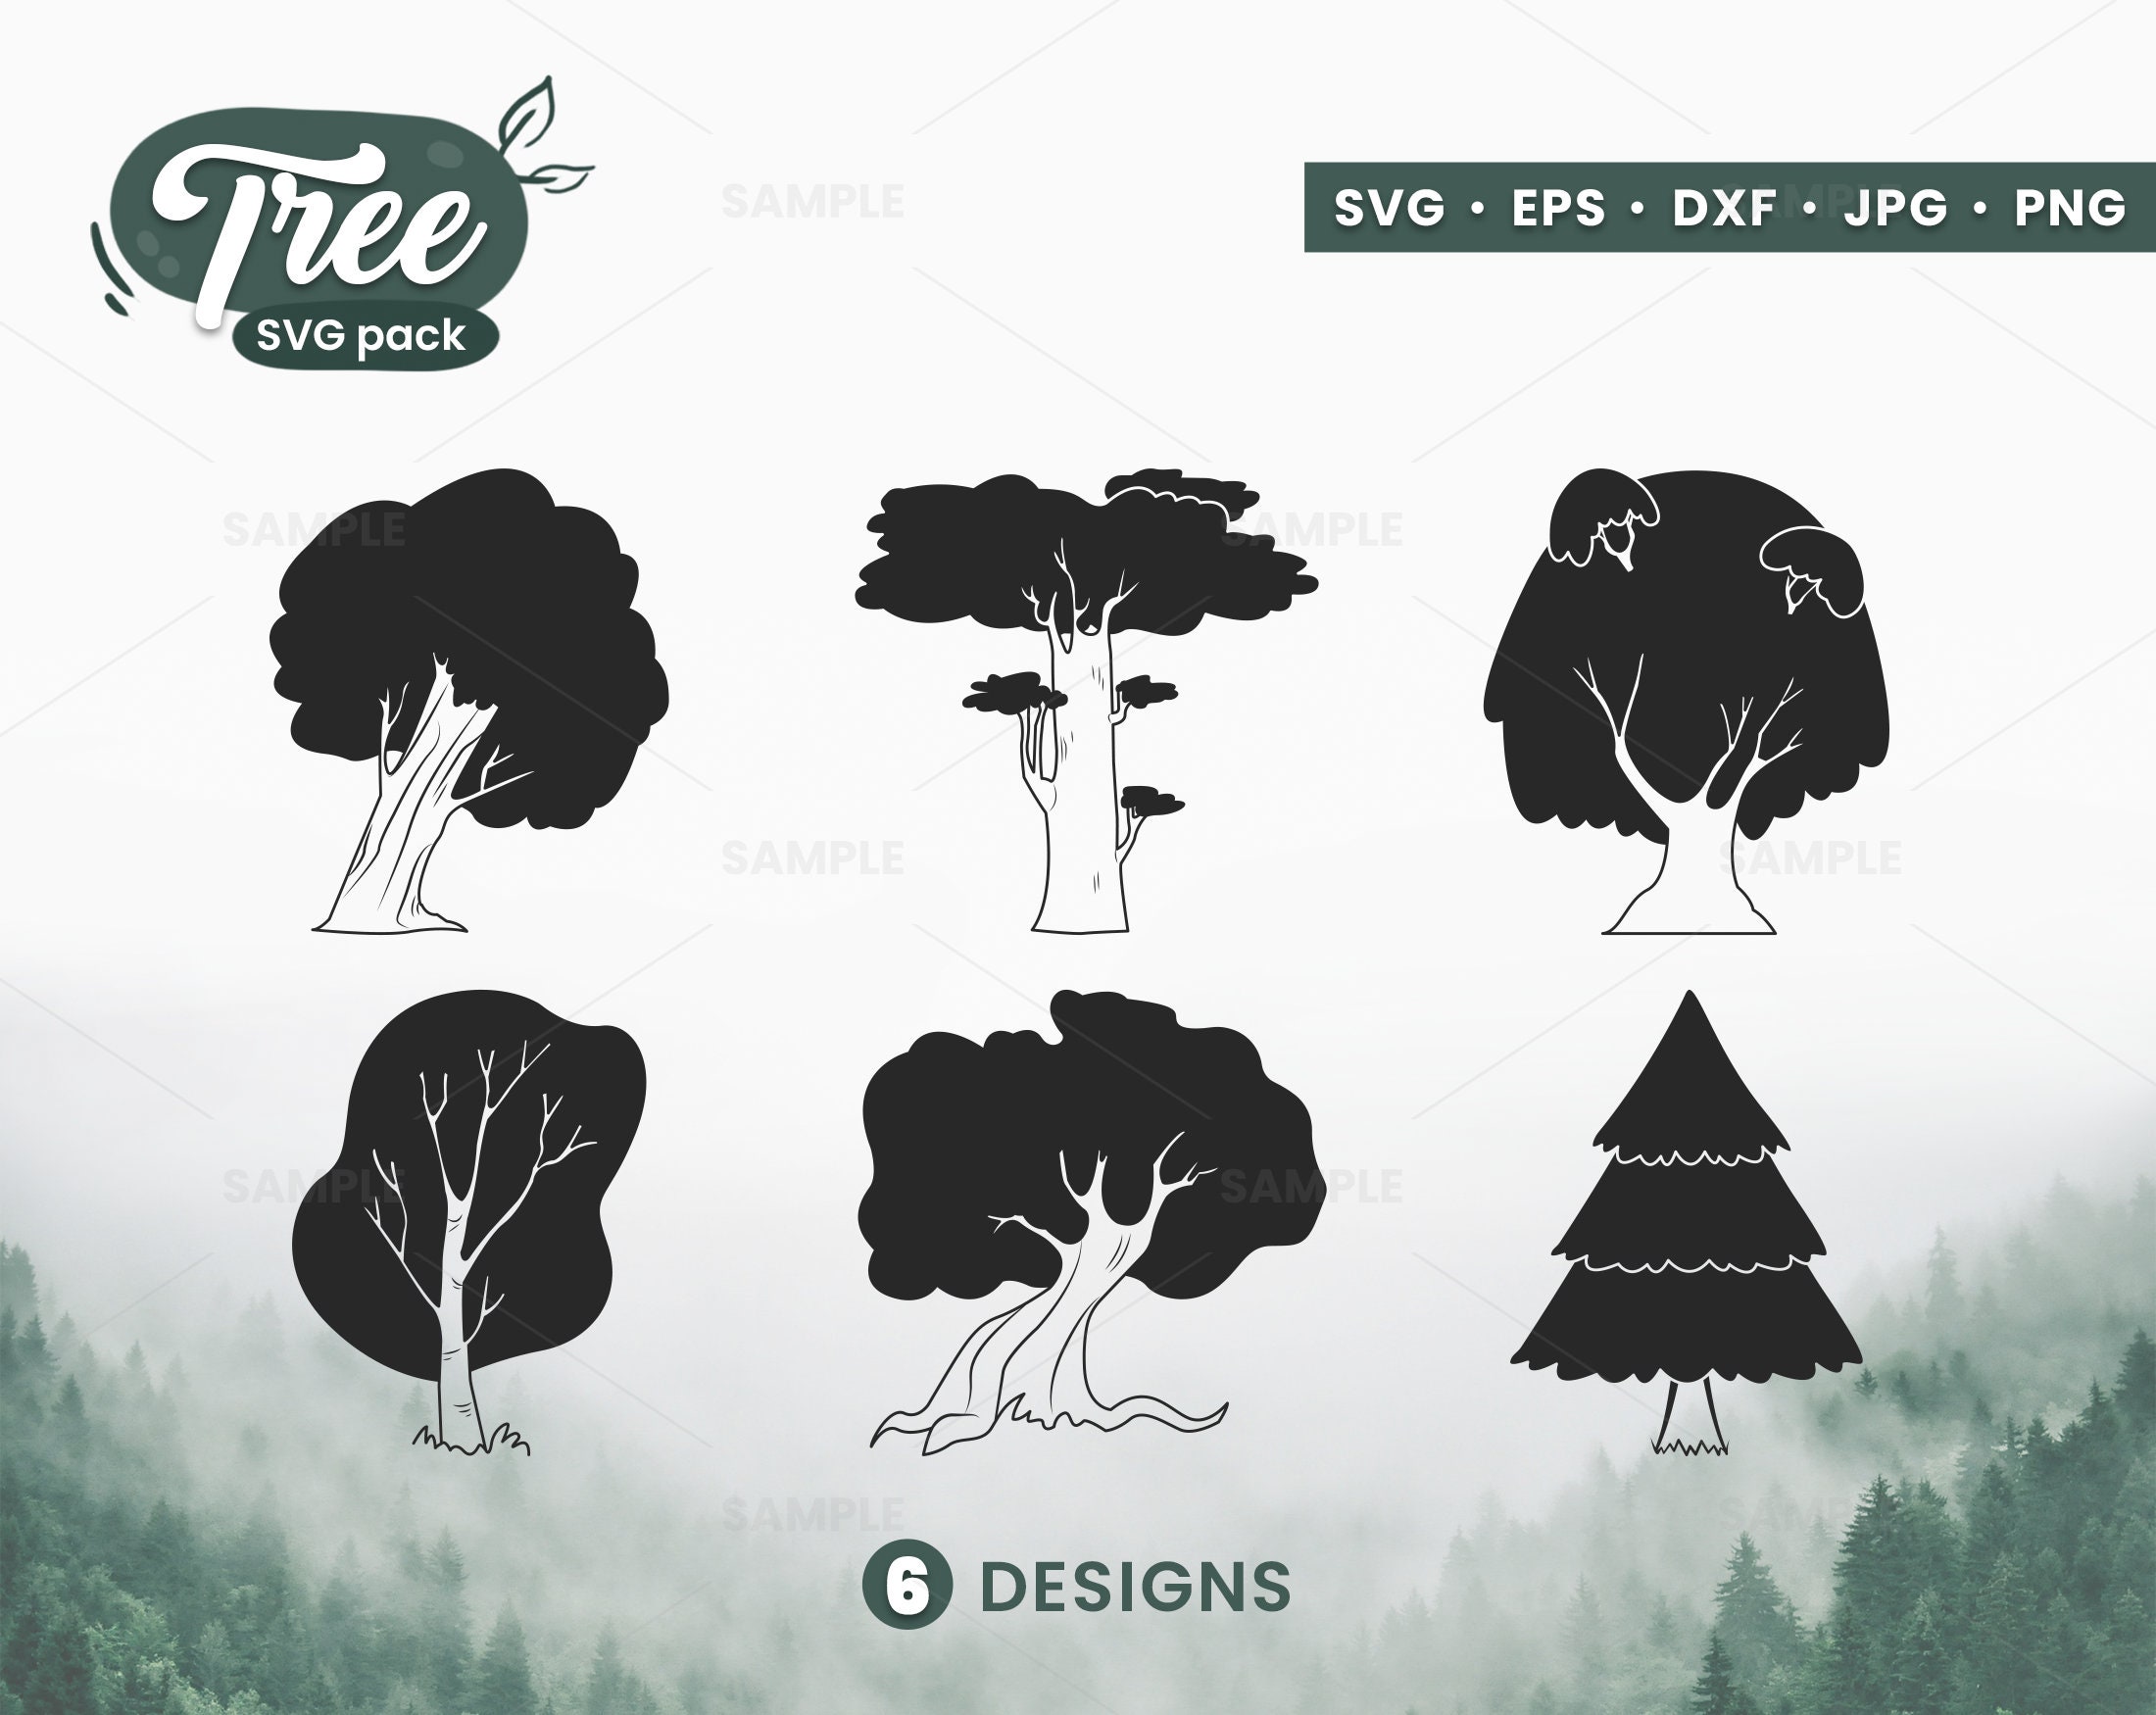 Tree SVG Pack 3 Tree SVG Tree Clipart Vector Cut File For Etsy Ireland